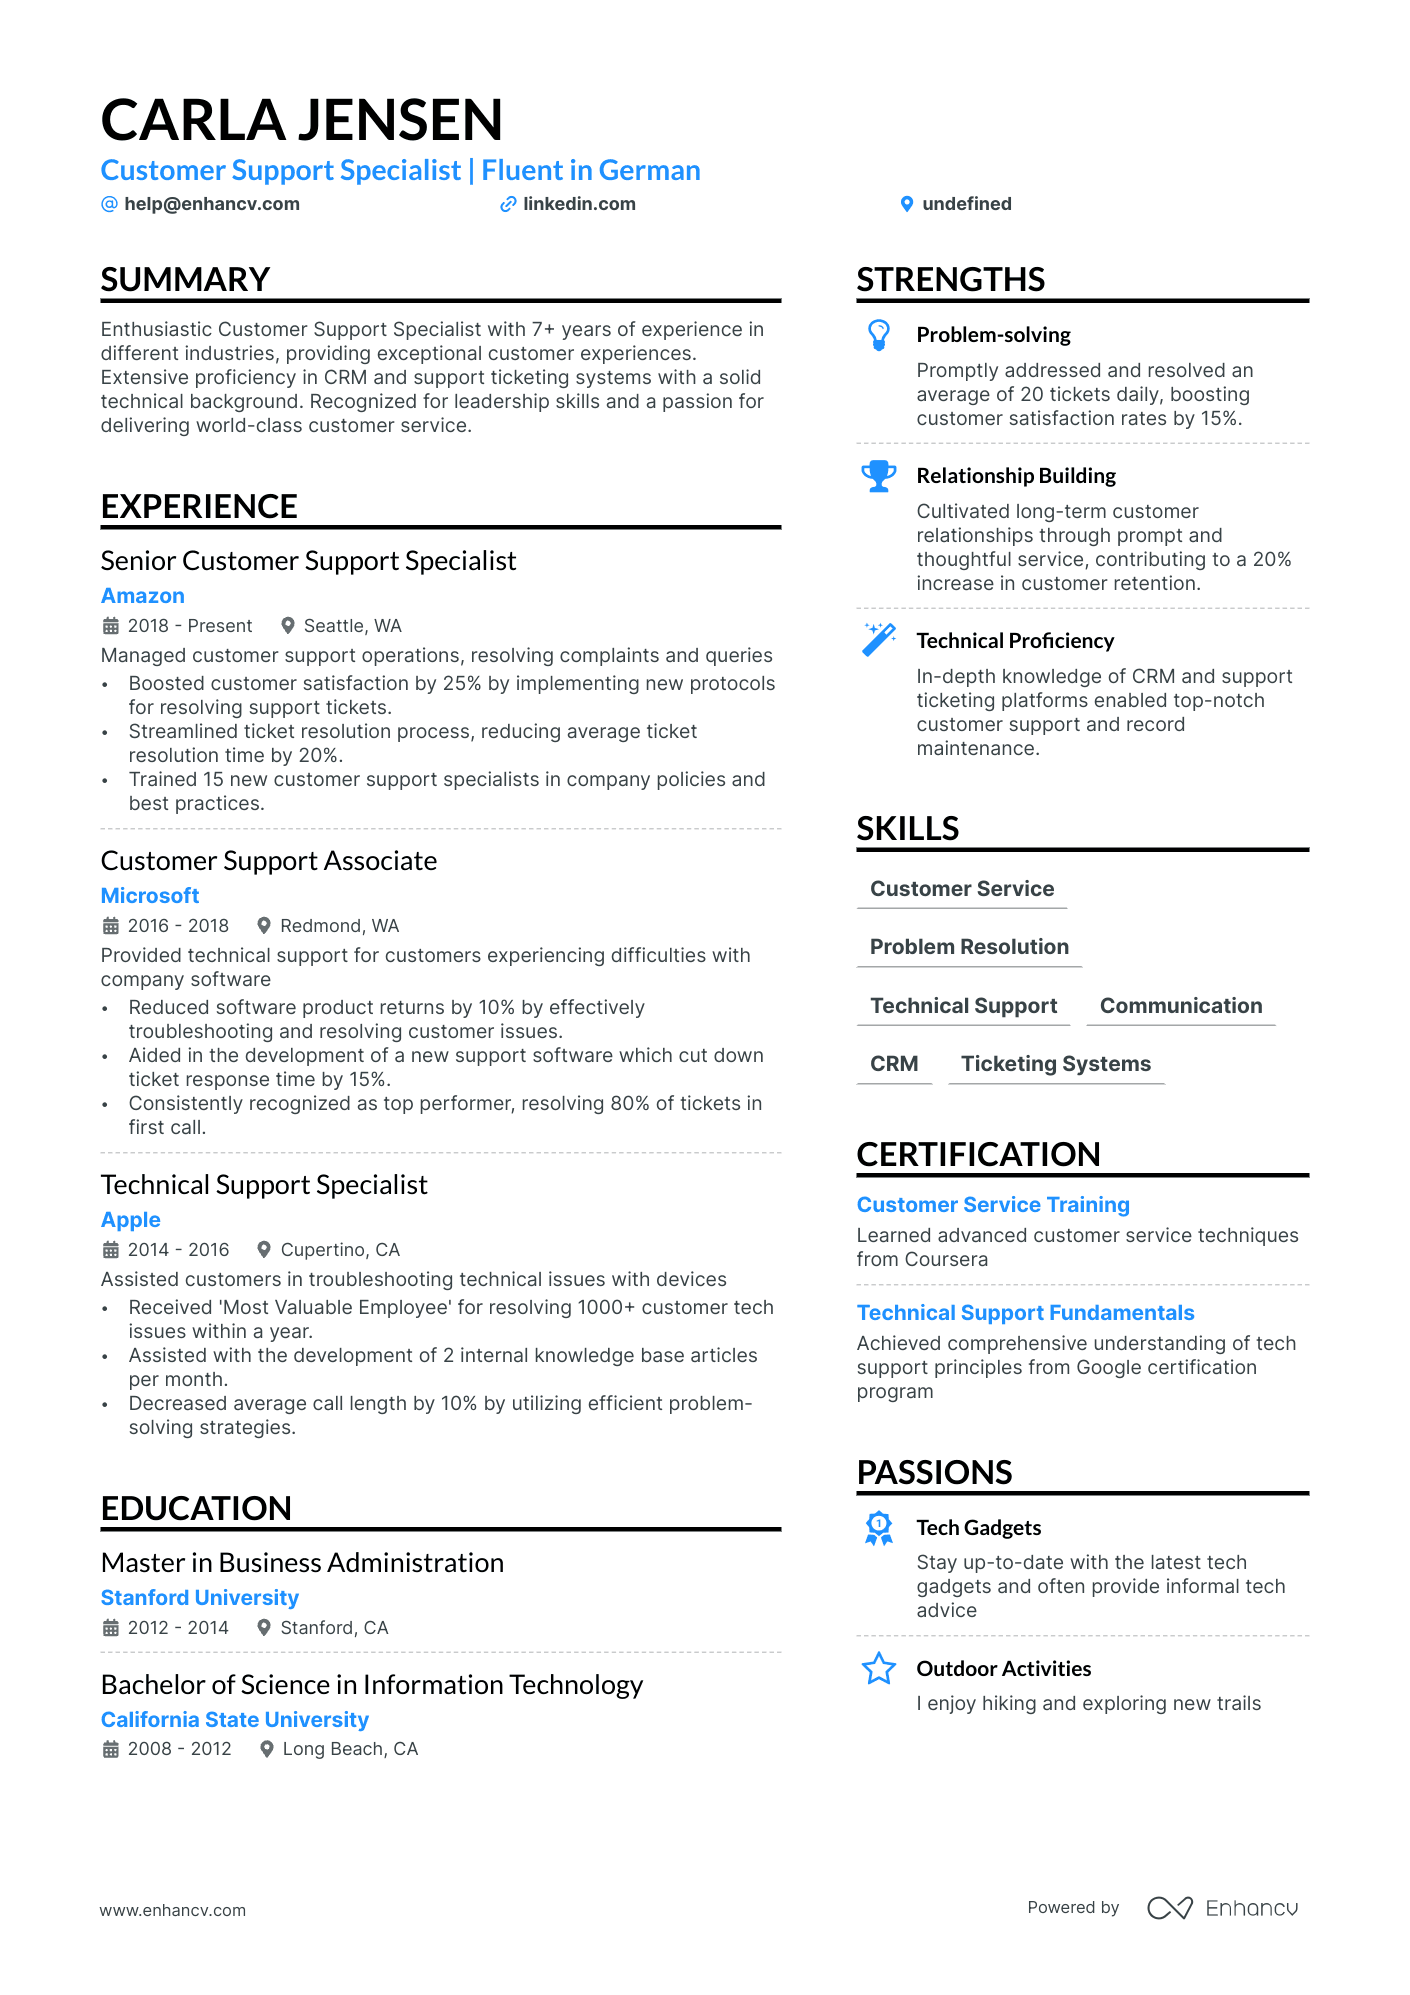 Customer Support Specialist resume example